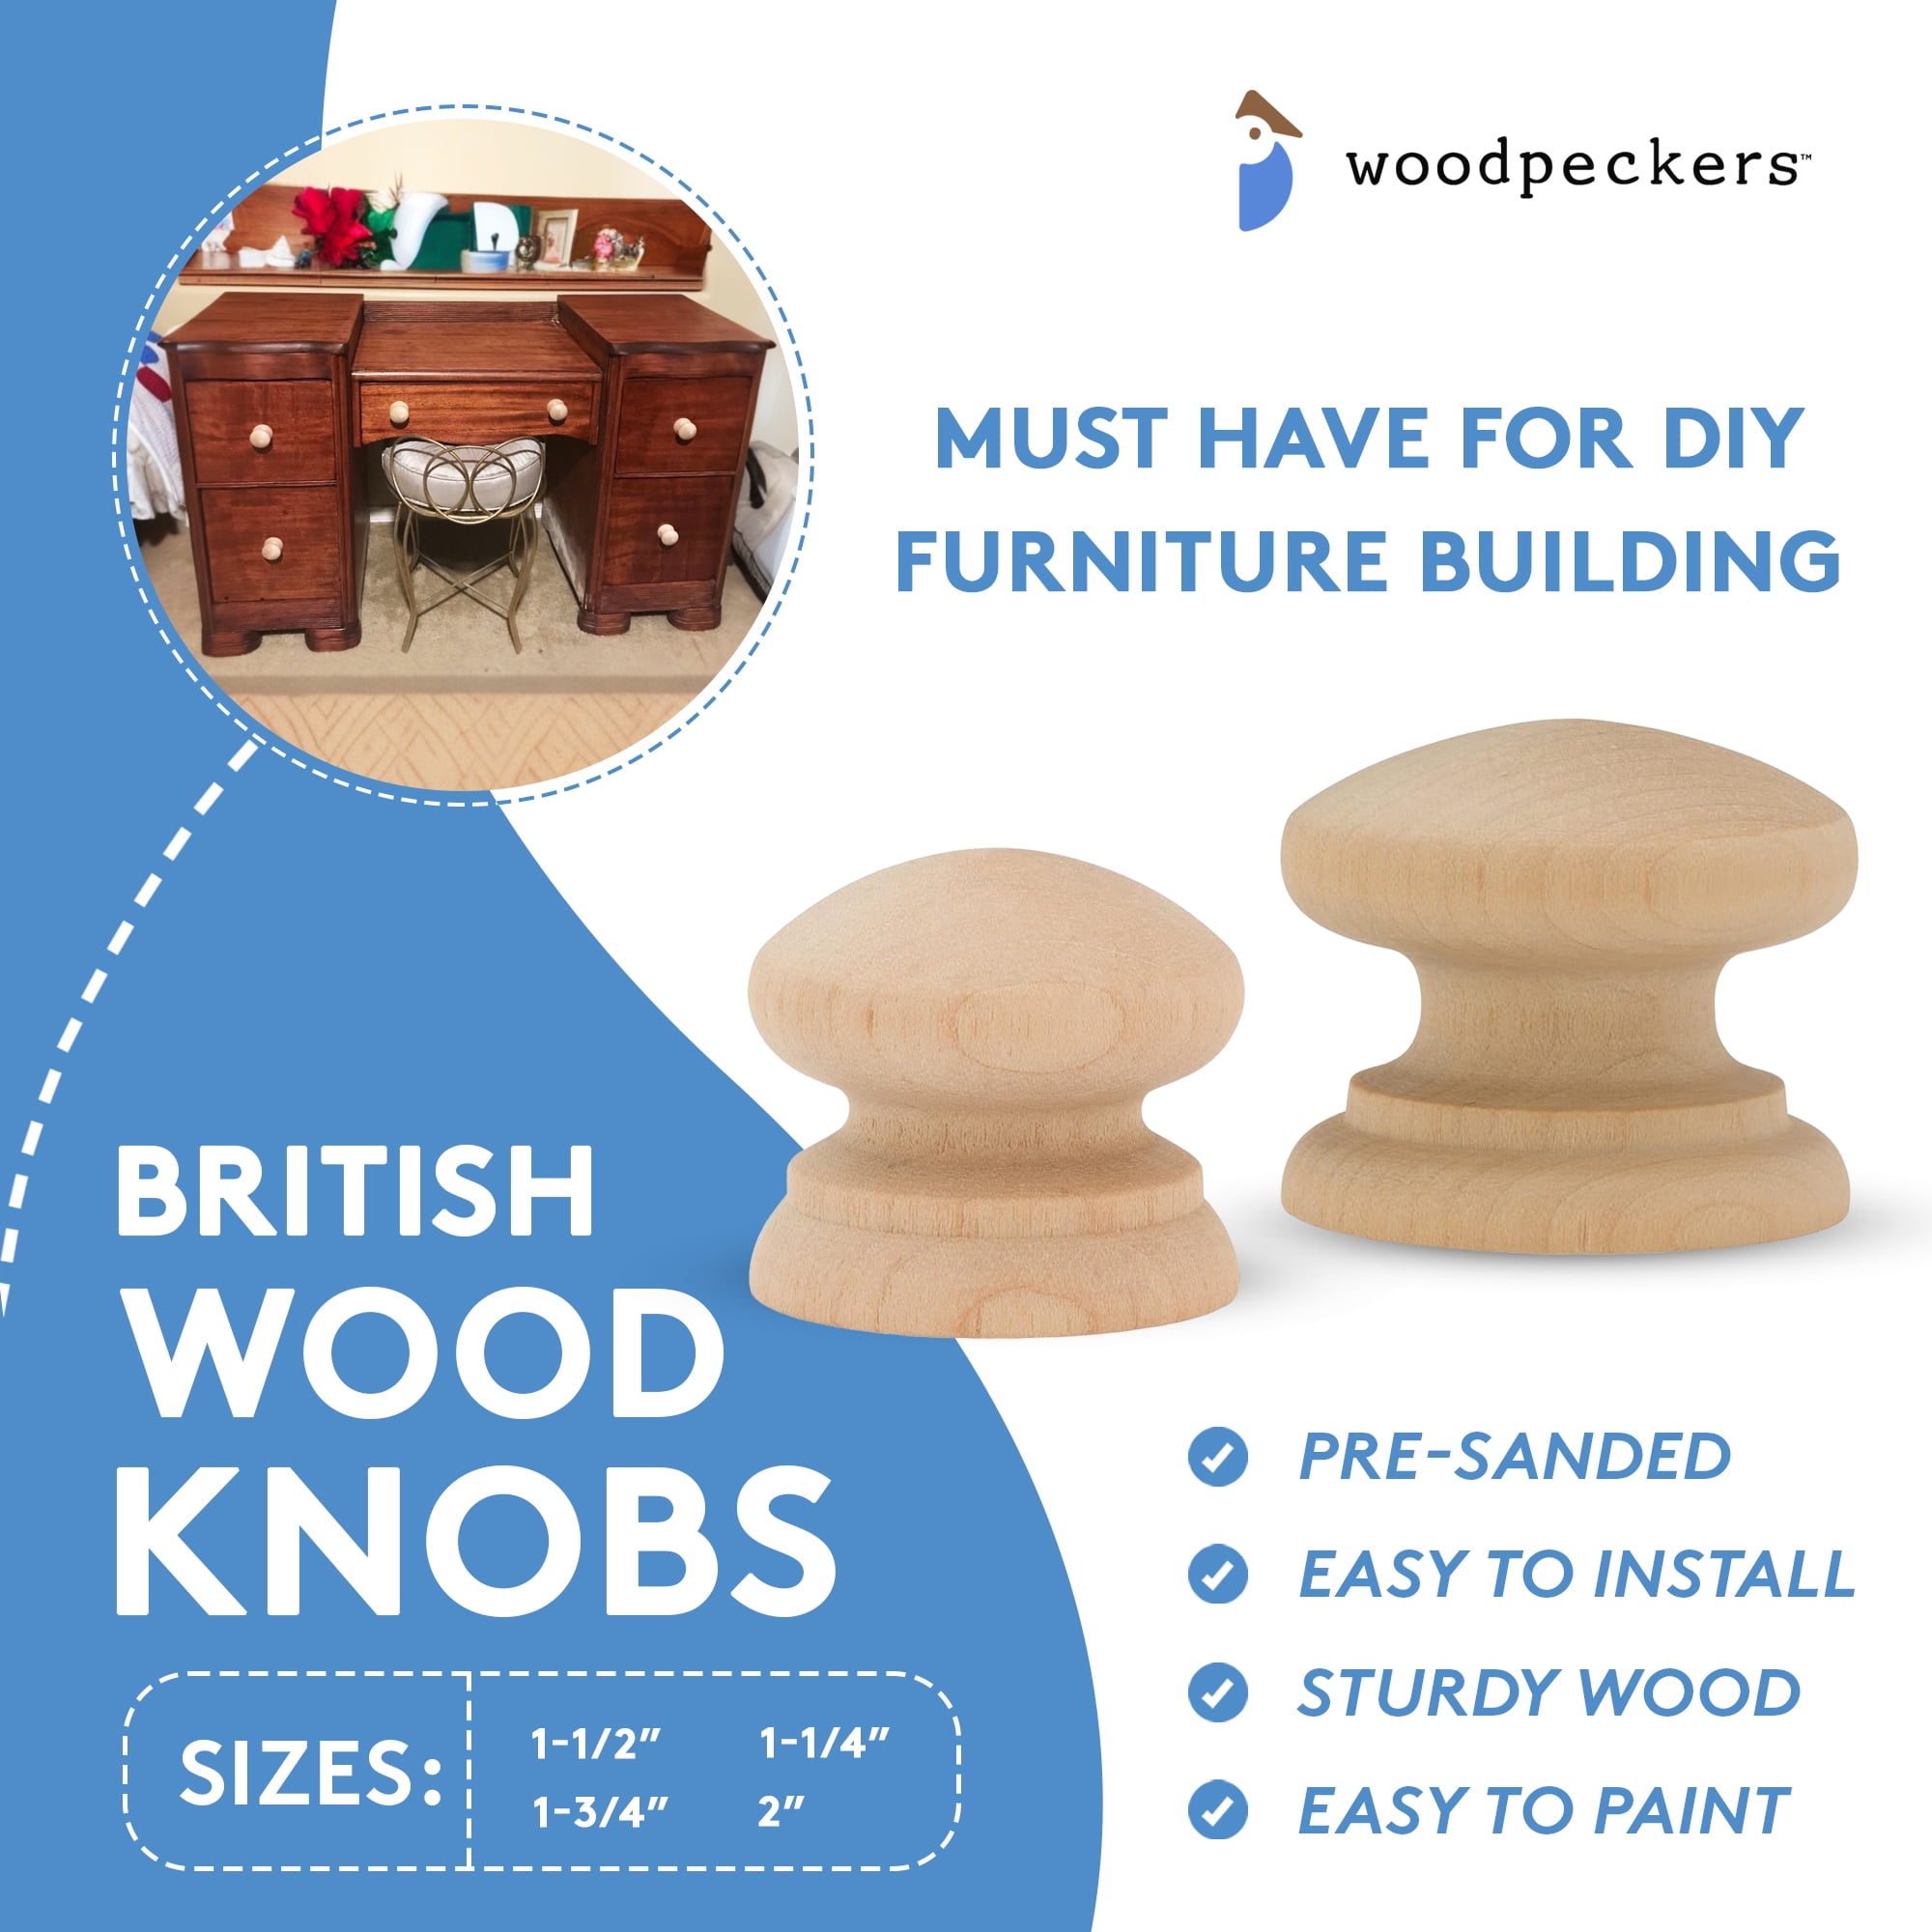 British Wood Knobs 2 inch, Pack of 25 Unfinished Round Wooden Knobs for  Crafts, Dresser Drawers, Cabinets, and Furniture, by Woodpeckers 